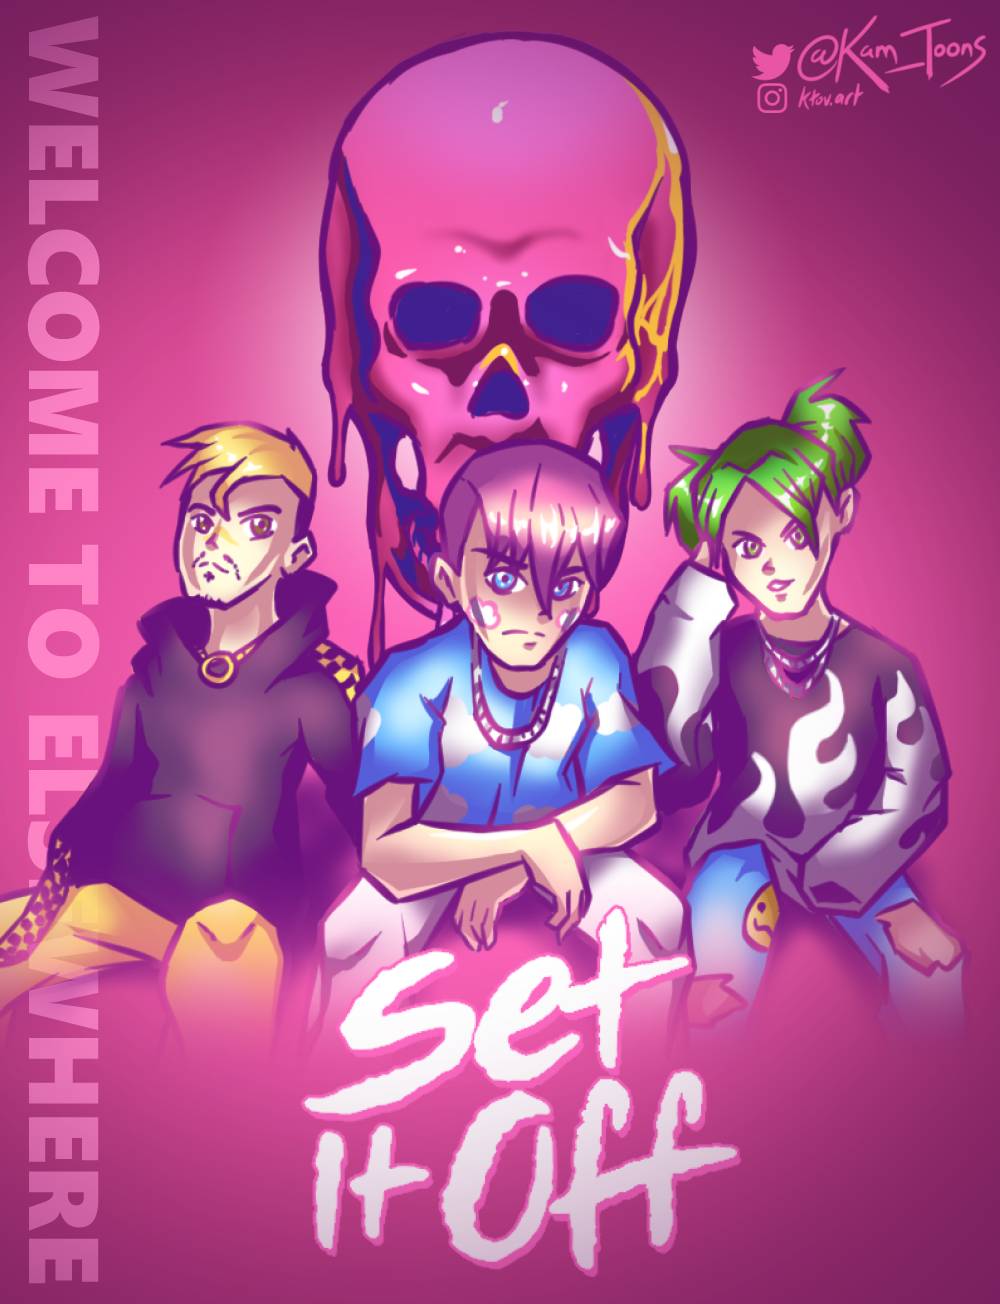 Set It Off] Welcome to Elsewhere by Kam-Toons on DeviantArt